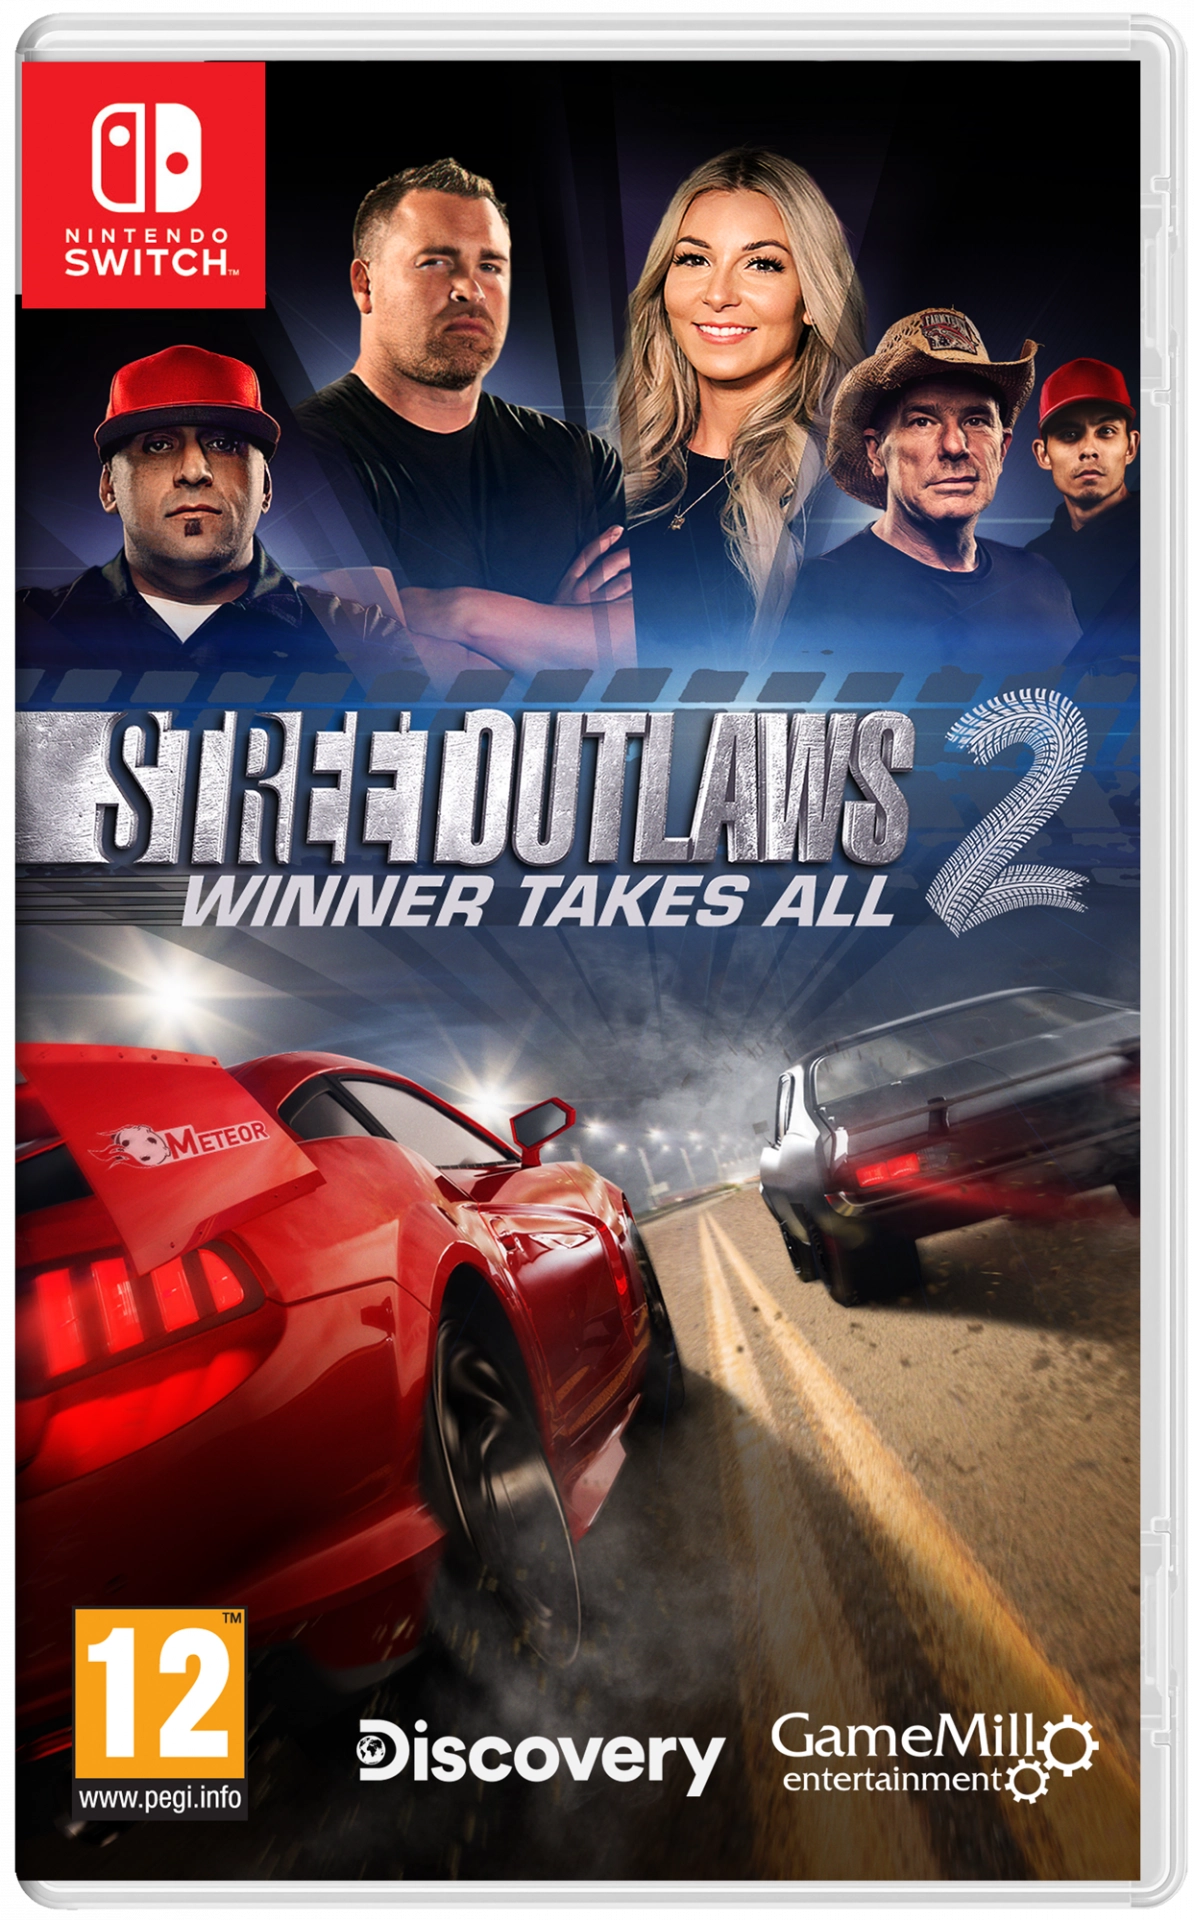 Street Outlaws 2: Winner Takes All (Switch), GameMill Entertainment